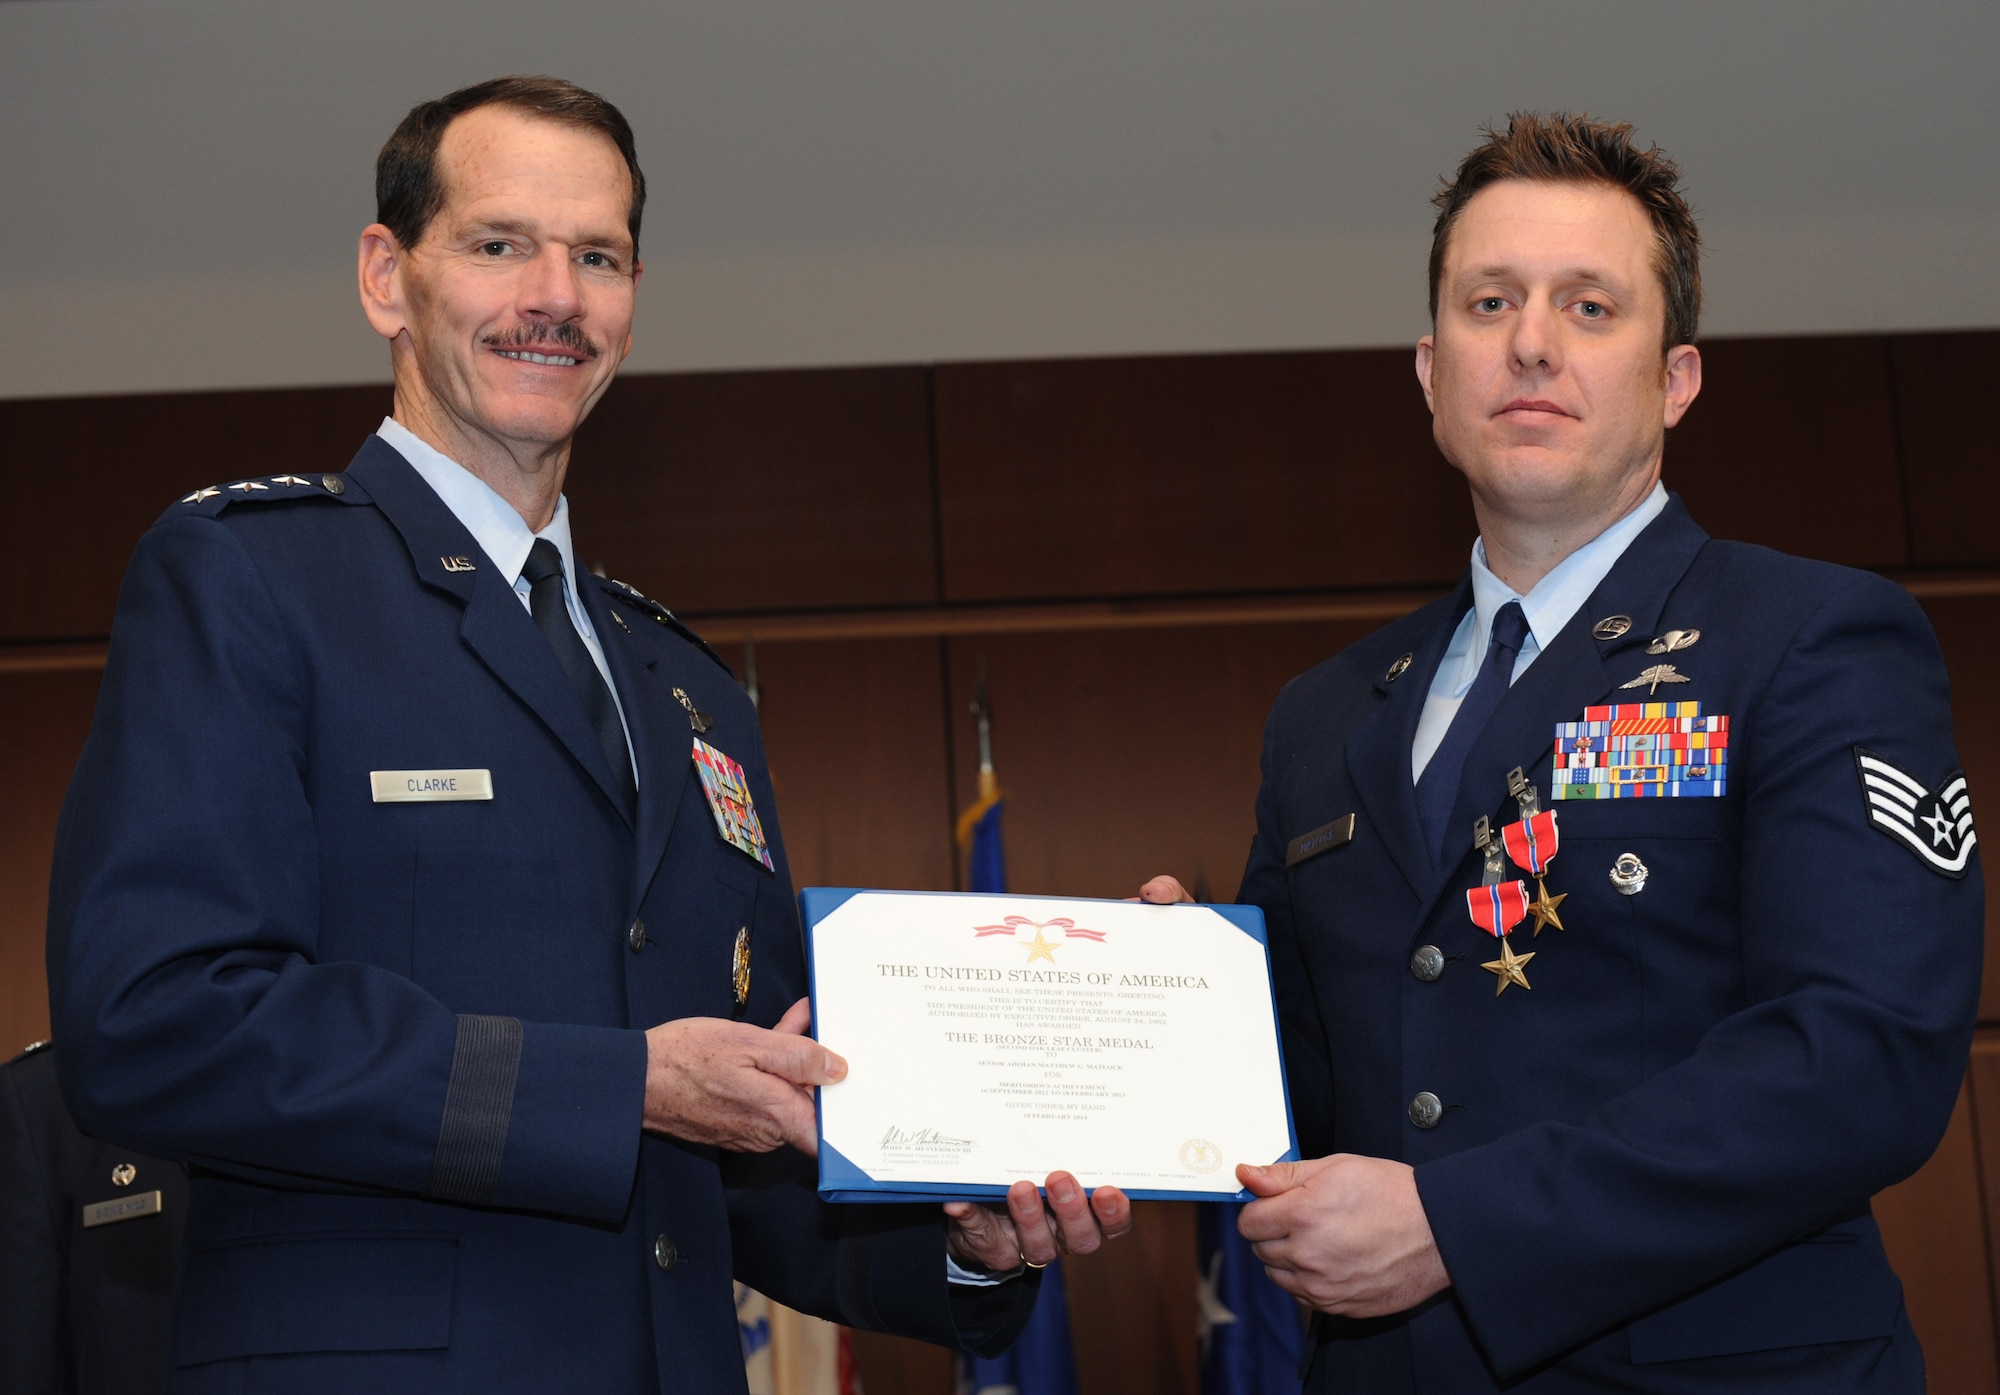 Air National Guard Director Lt. Gen. Stanley E. Clark III, presents the Bronze Star medal to Staff Sgt. Matthew Matlock, a combat controller with the Oregon Air National Guard's 125th Special Tactics Squadron, during a ceremony at the 41st Infantry Division Armed Forces Reserve Center at Camp Withycombe, in Clackamas, Ore., March 24, 2014. (U.S. Air National Guard photo by Tech. Sgt. John Hughel, 142nd Fighter Wing Public Affairs/Released)